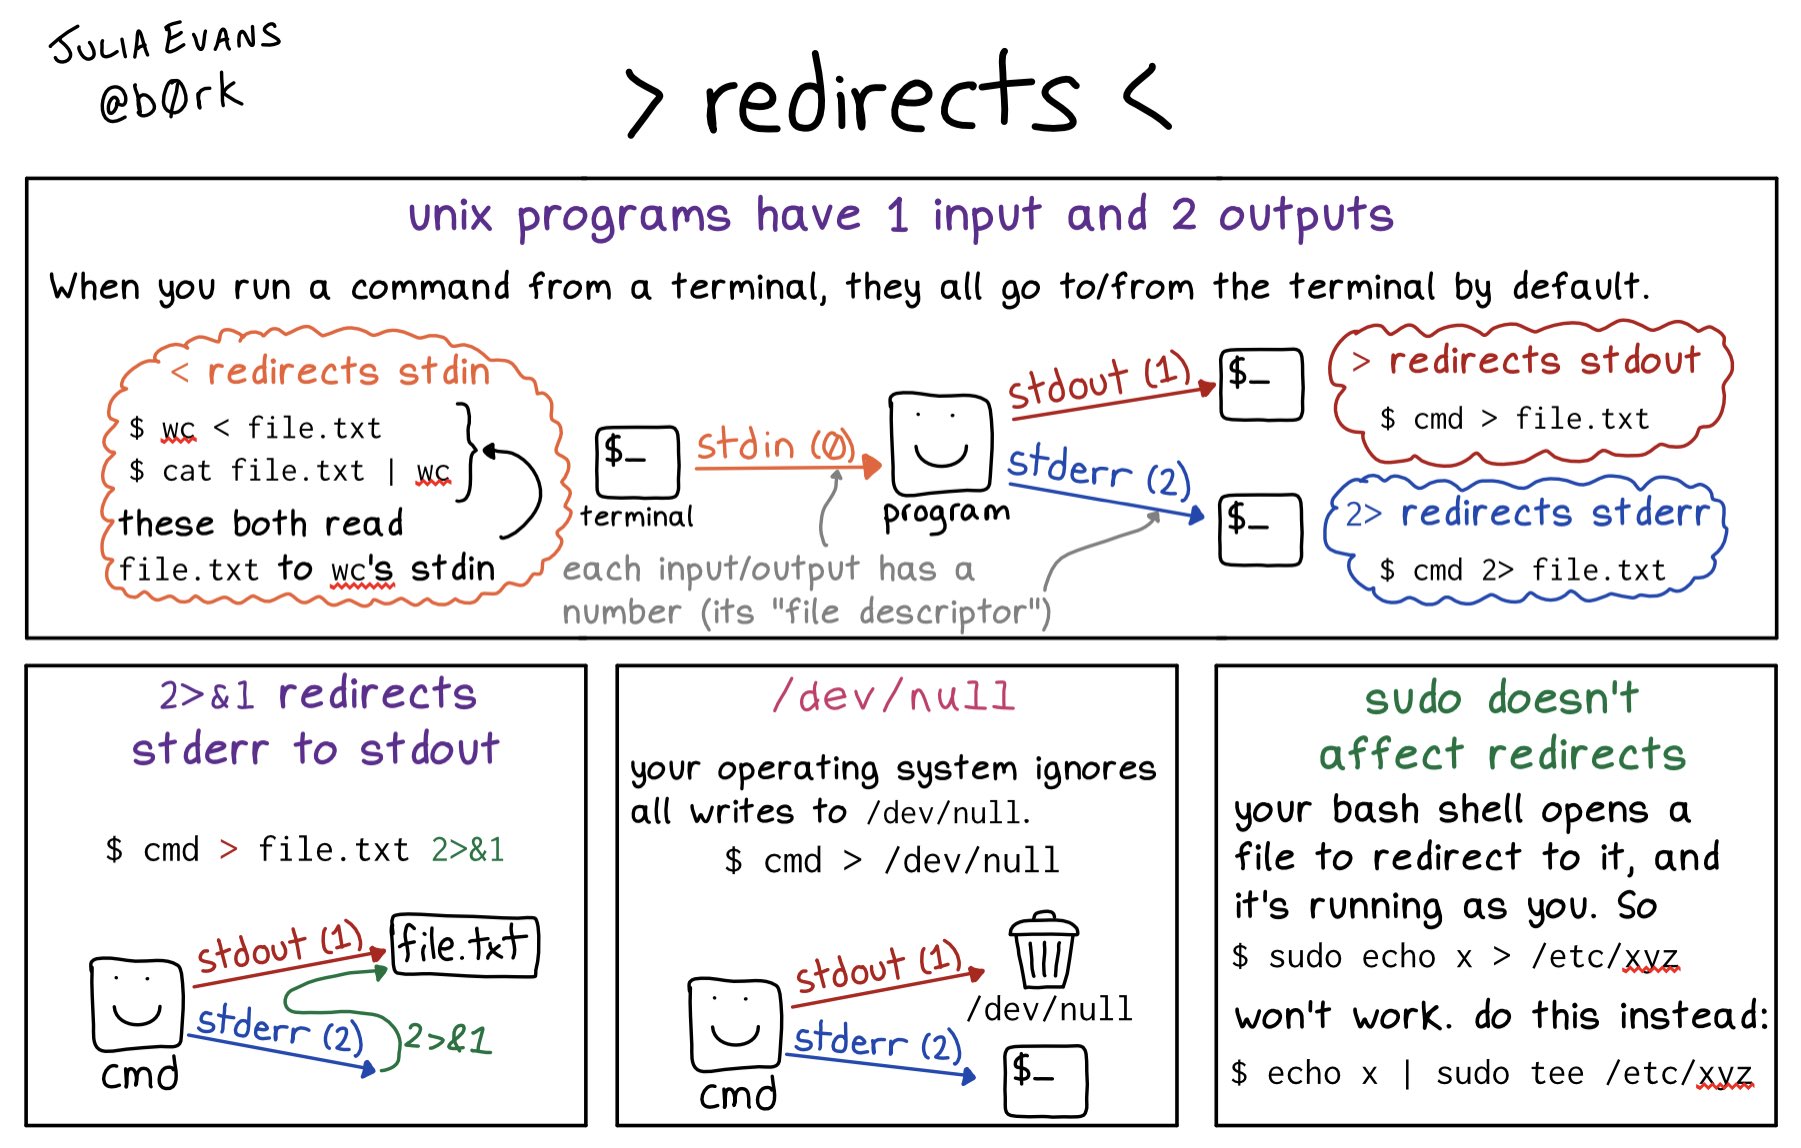 Redirects